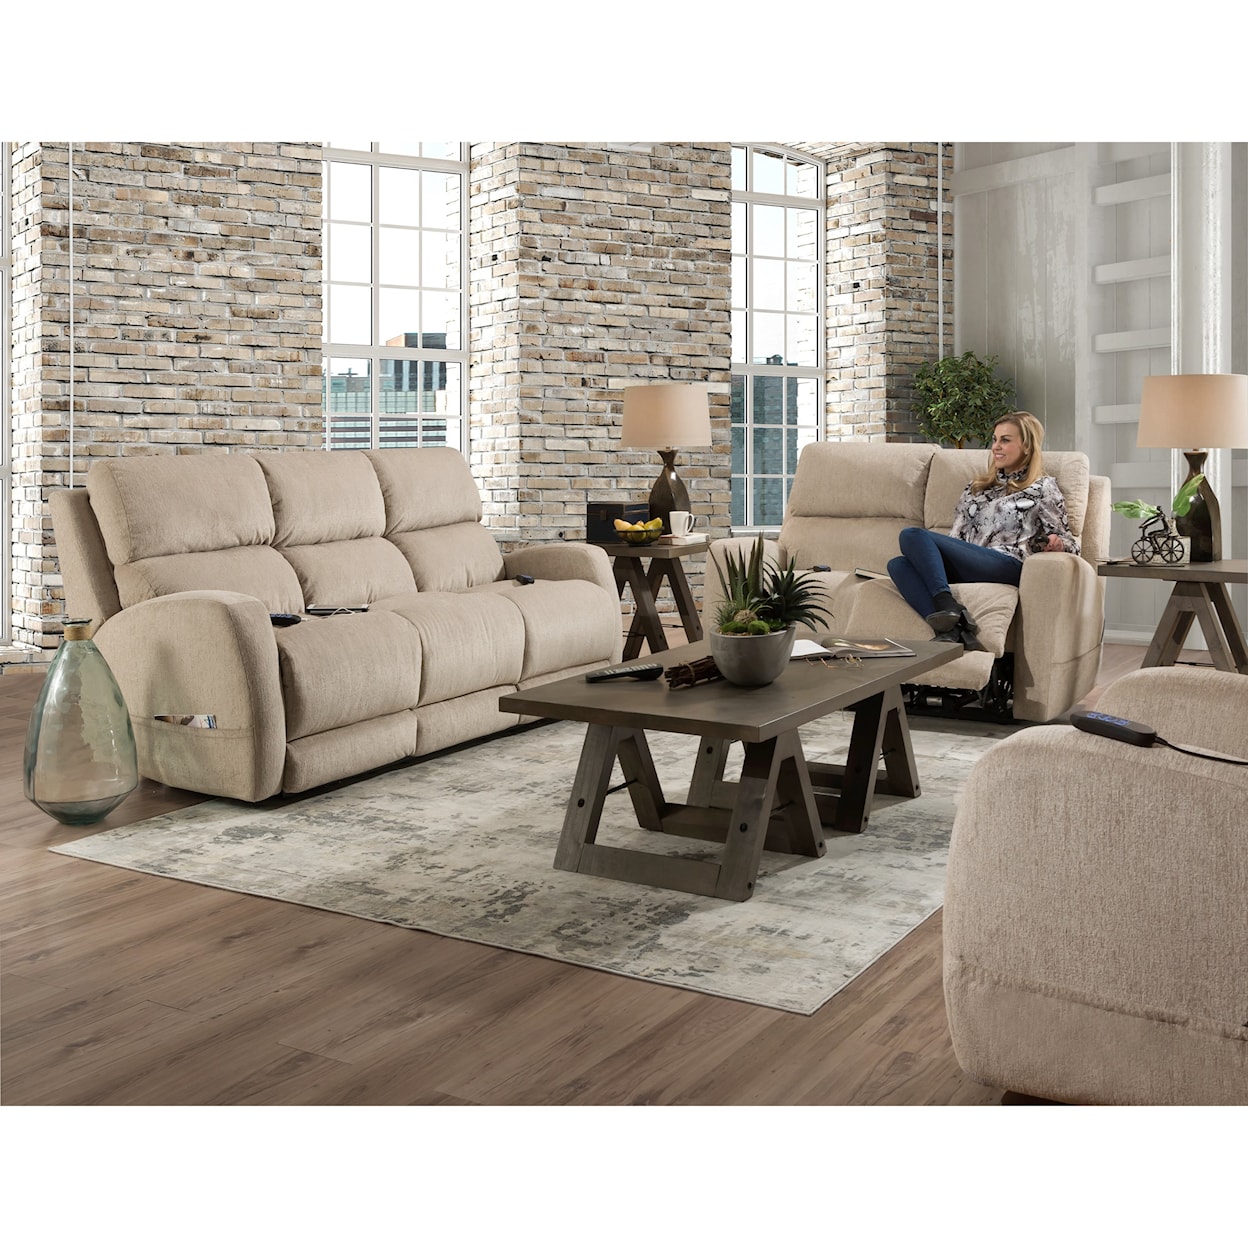 Homestretch 193 193 37 15 Casual Double Reclining Power Sofa Rifes Home Furniture Reclining